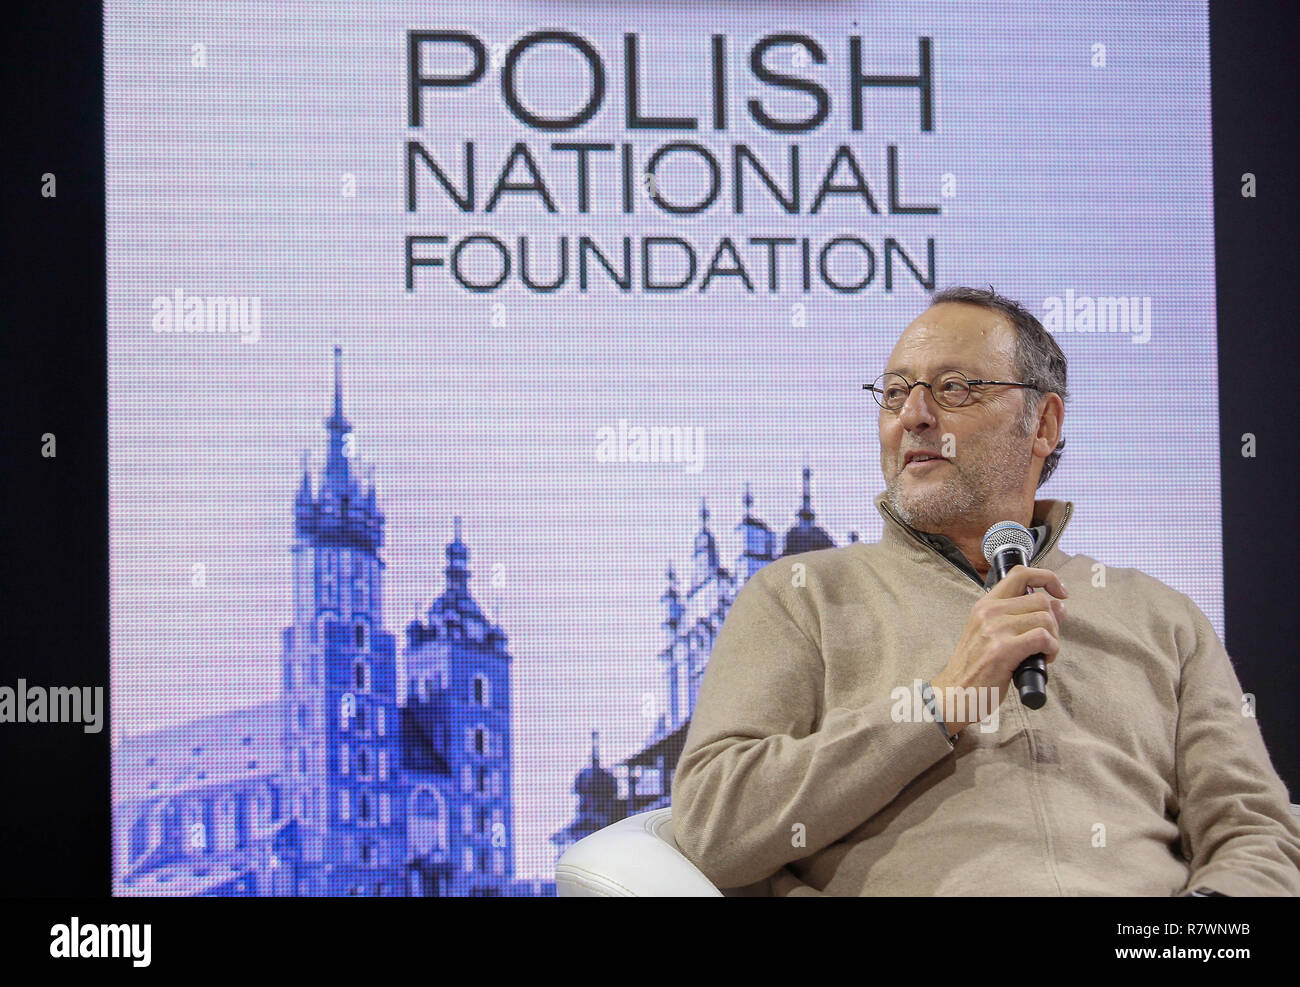 Krakow, Poland. 11th Dec, 2018. Actor Jean Reno seen during a meeting with fans and students.Jean Reno visited Poland following the invitation of the Polish National Foundation. In Krakow, he met with fans, visited the old town and got to know Traditional Polish Christmas dishes. Credit: Damian Klamka/SOPA Images/ZUMA Wire/Alamy Live News Stock Photo